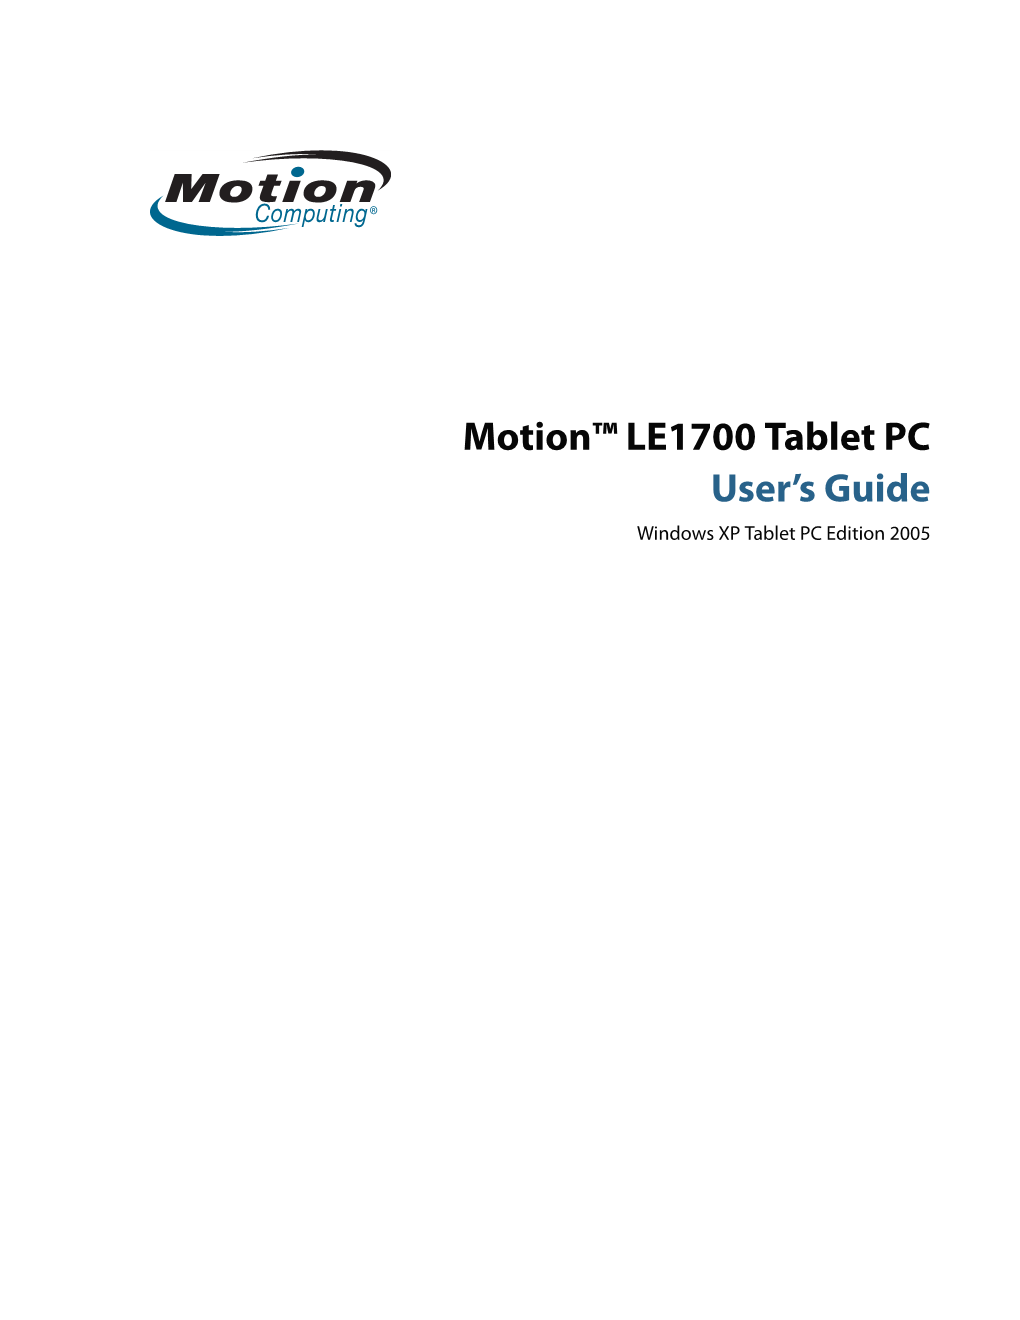 Motion™ LE1700 Tablet PC User’S Guide Windows XP Tablet PC Edition 2005 © 2007 Motion Computing, Inc